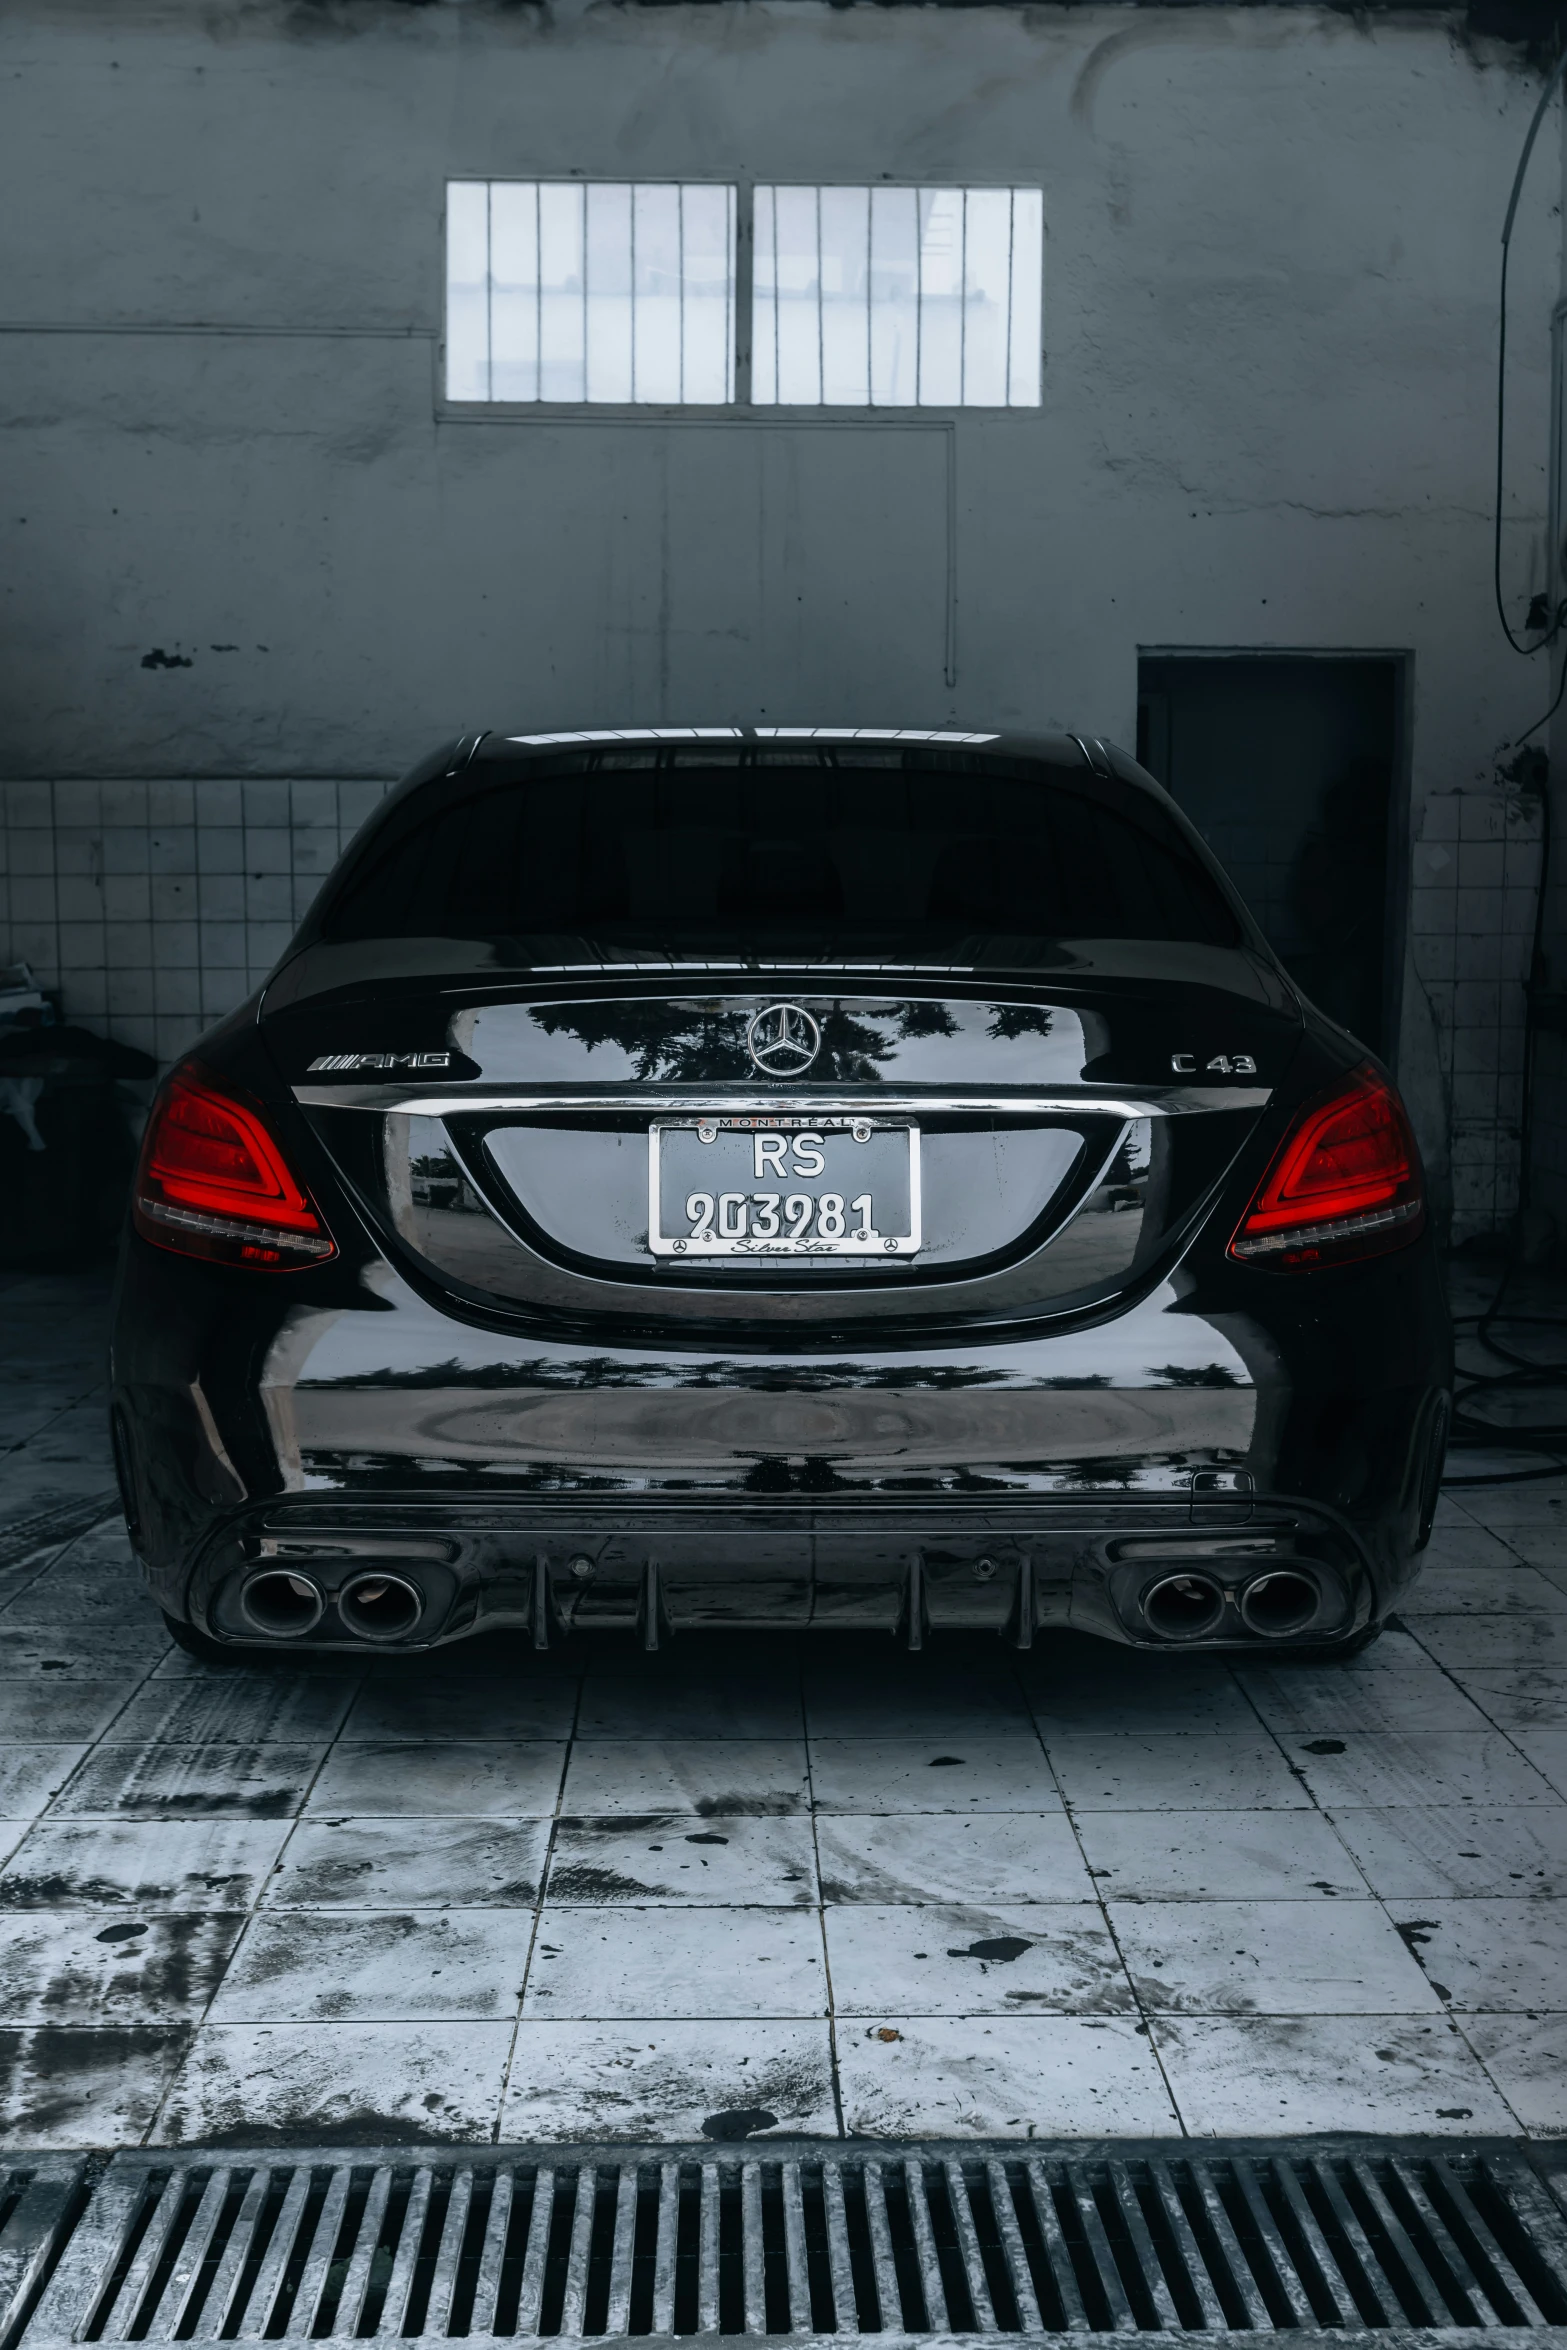 the back end of a black car parked in a garage